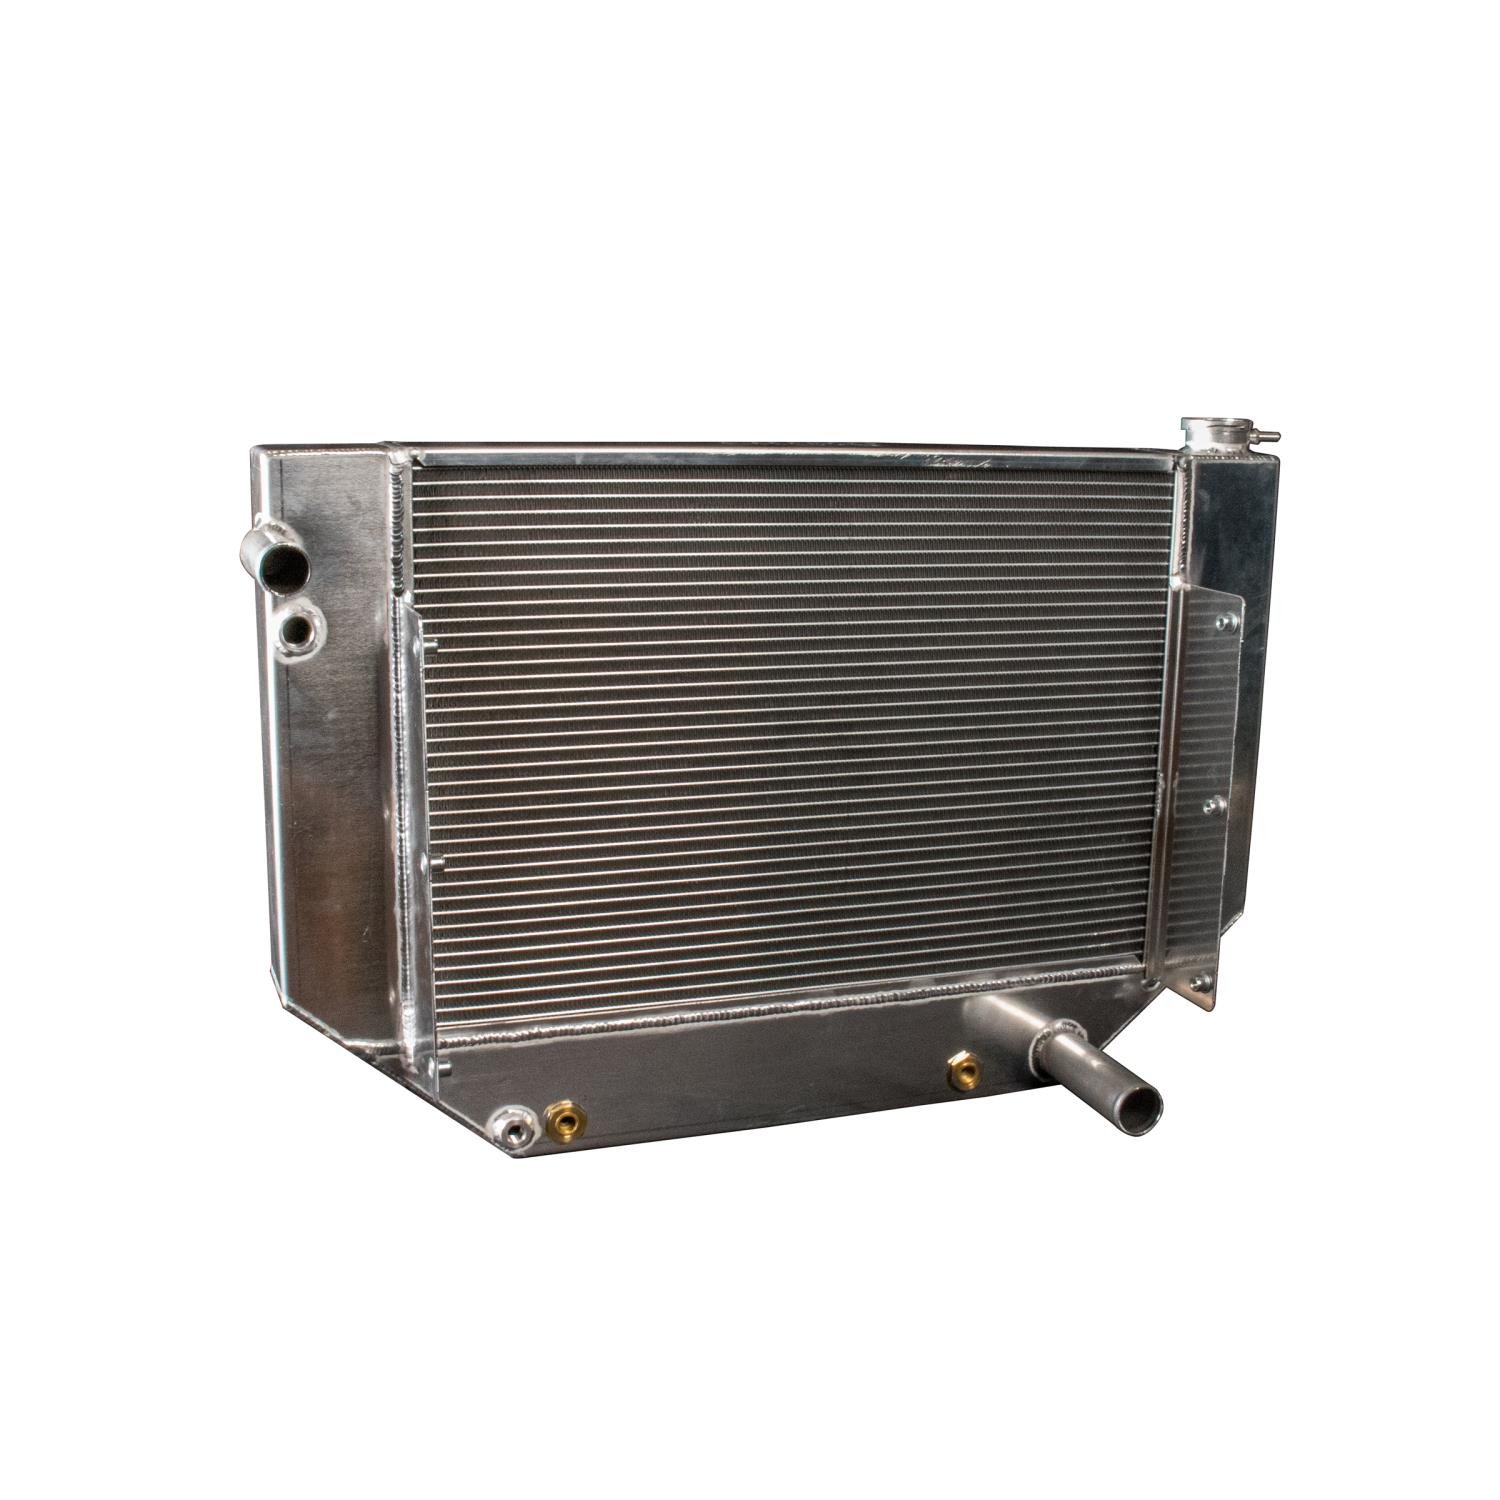 PerformanceFit Radiator 1955-1957 Tri Five Chevy LS3 Swap with Transmission Cooler